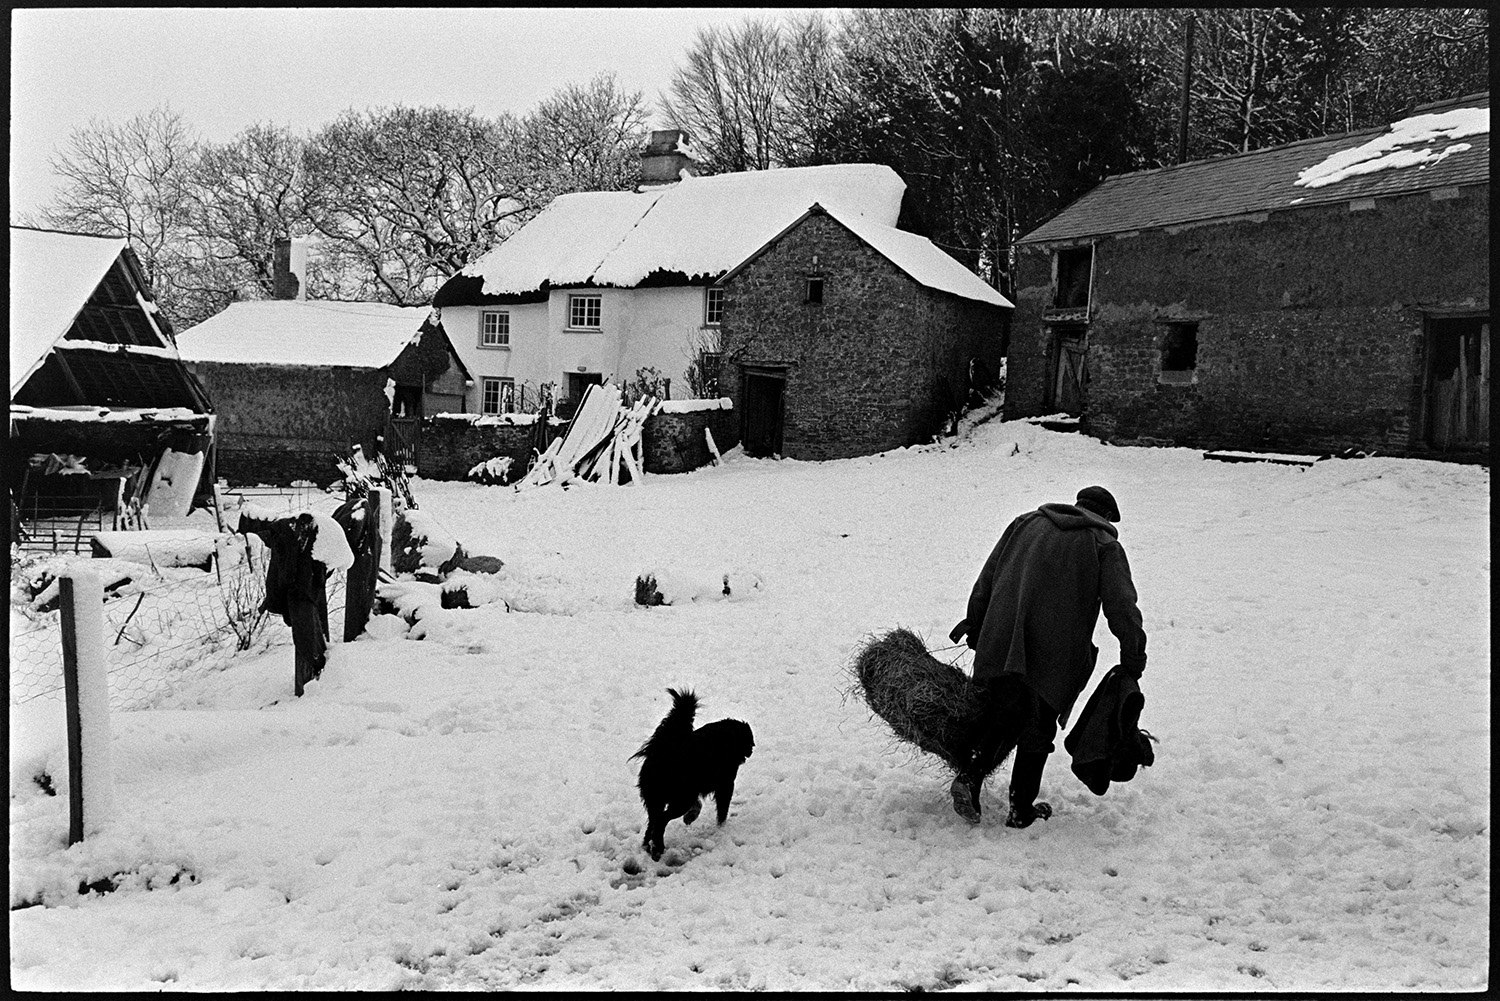 Farm under snow, farmer taking hay to cattle with dogs. 
[George Ayre carrying a hay bale to take to cattle. He is walking through the snow covered farmyard at Ashwell, Dolton with a dog. The thatched farmhouse and barns are covered with snow.]